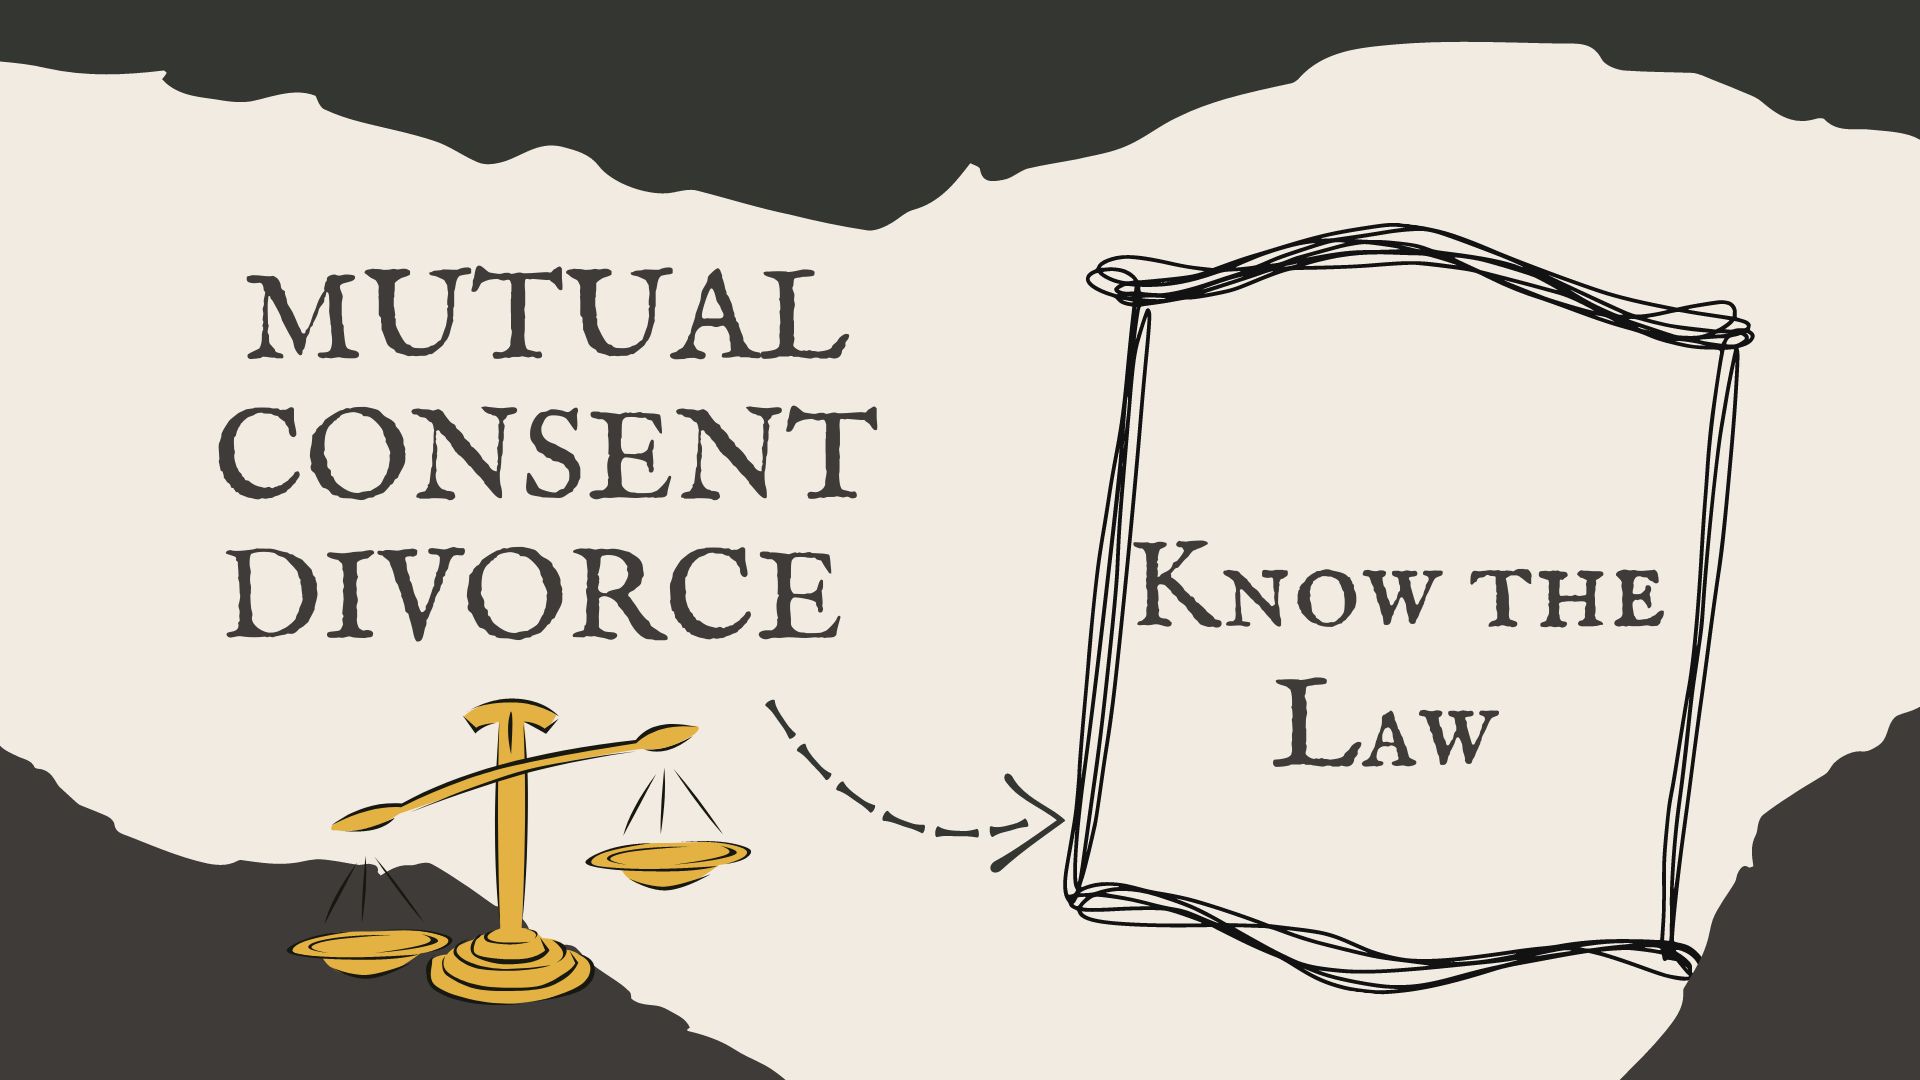 how long it takes to obtain a mutual consent divorce